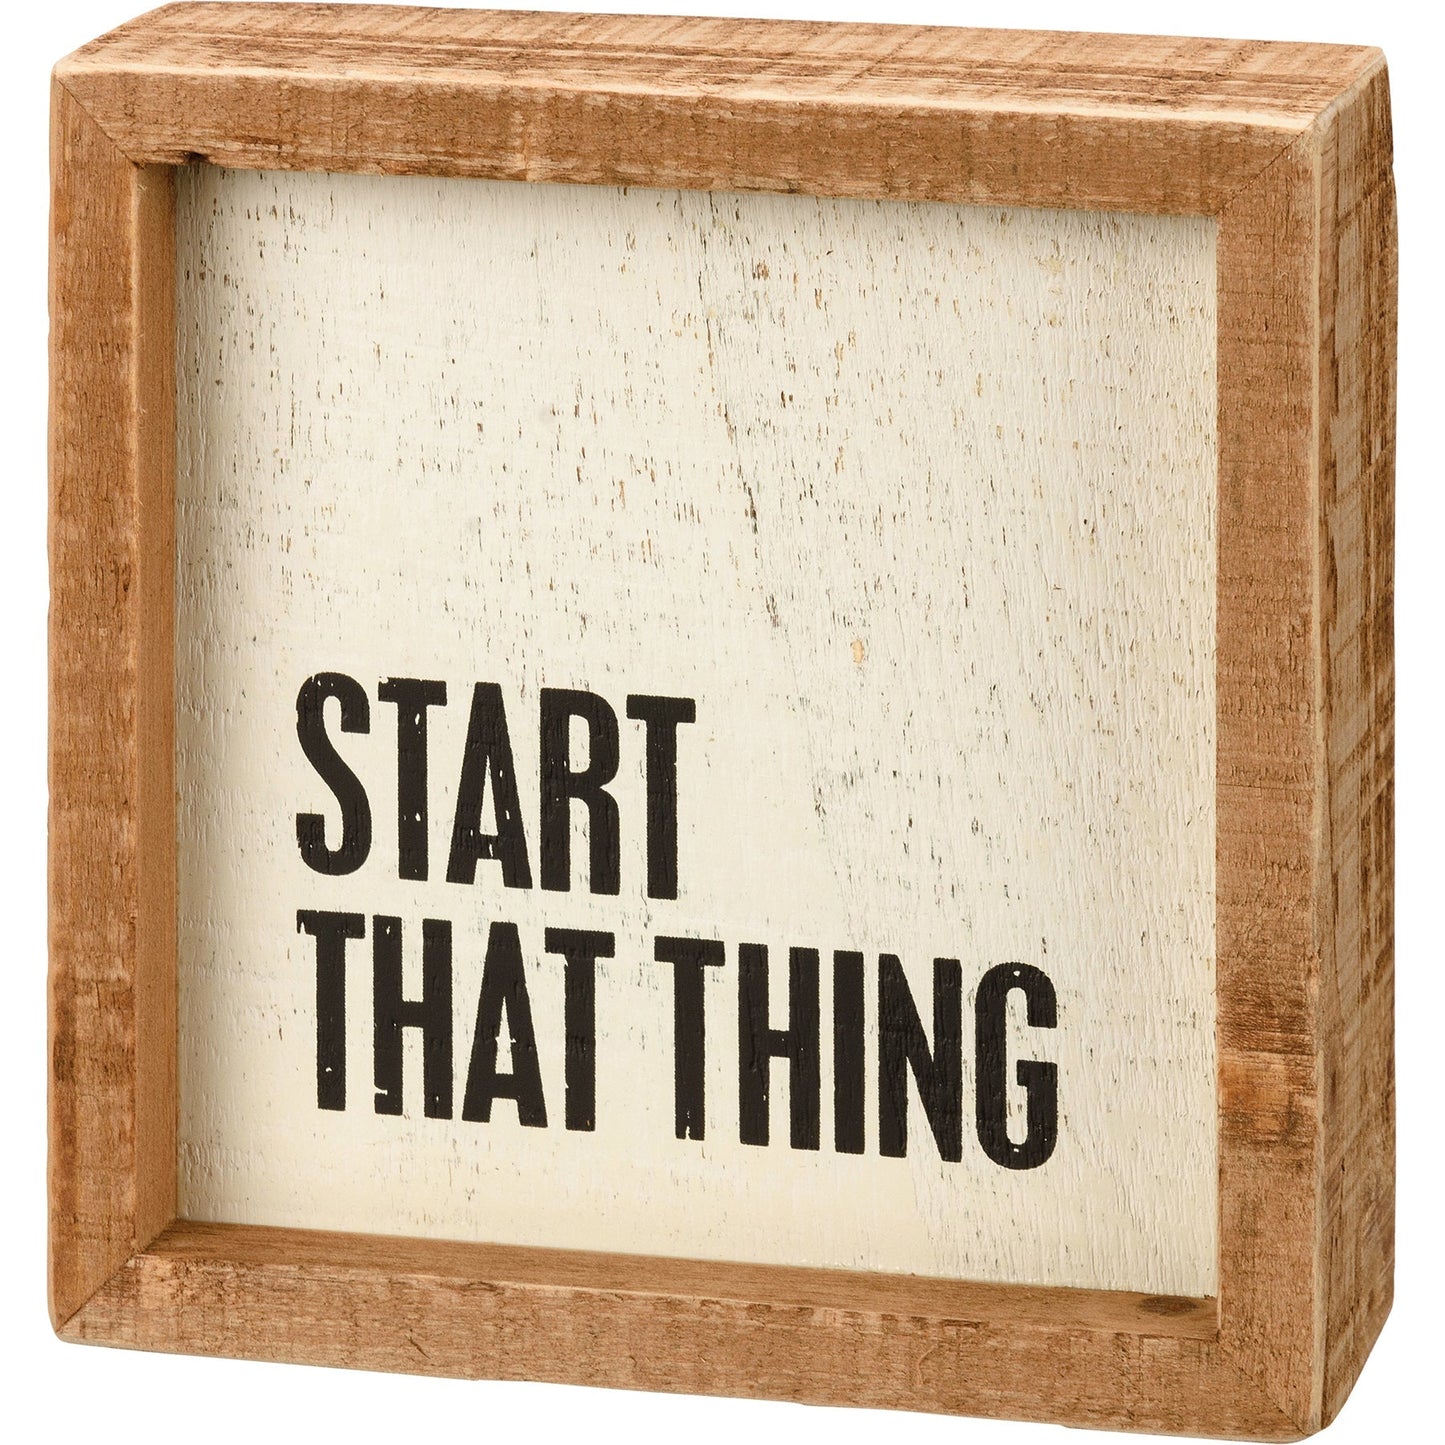 Start That Thing Wooden Inset Box Sign | Rustic Farmhouse